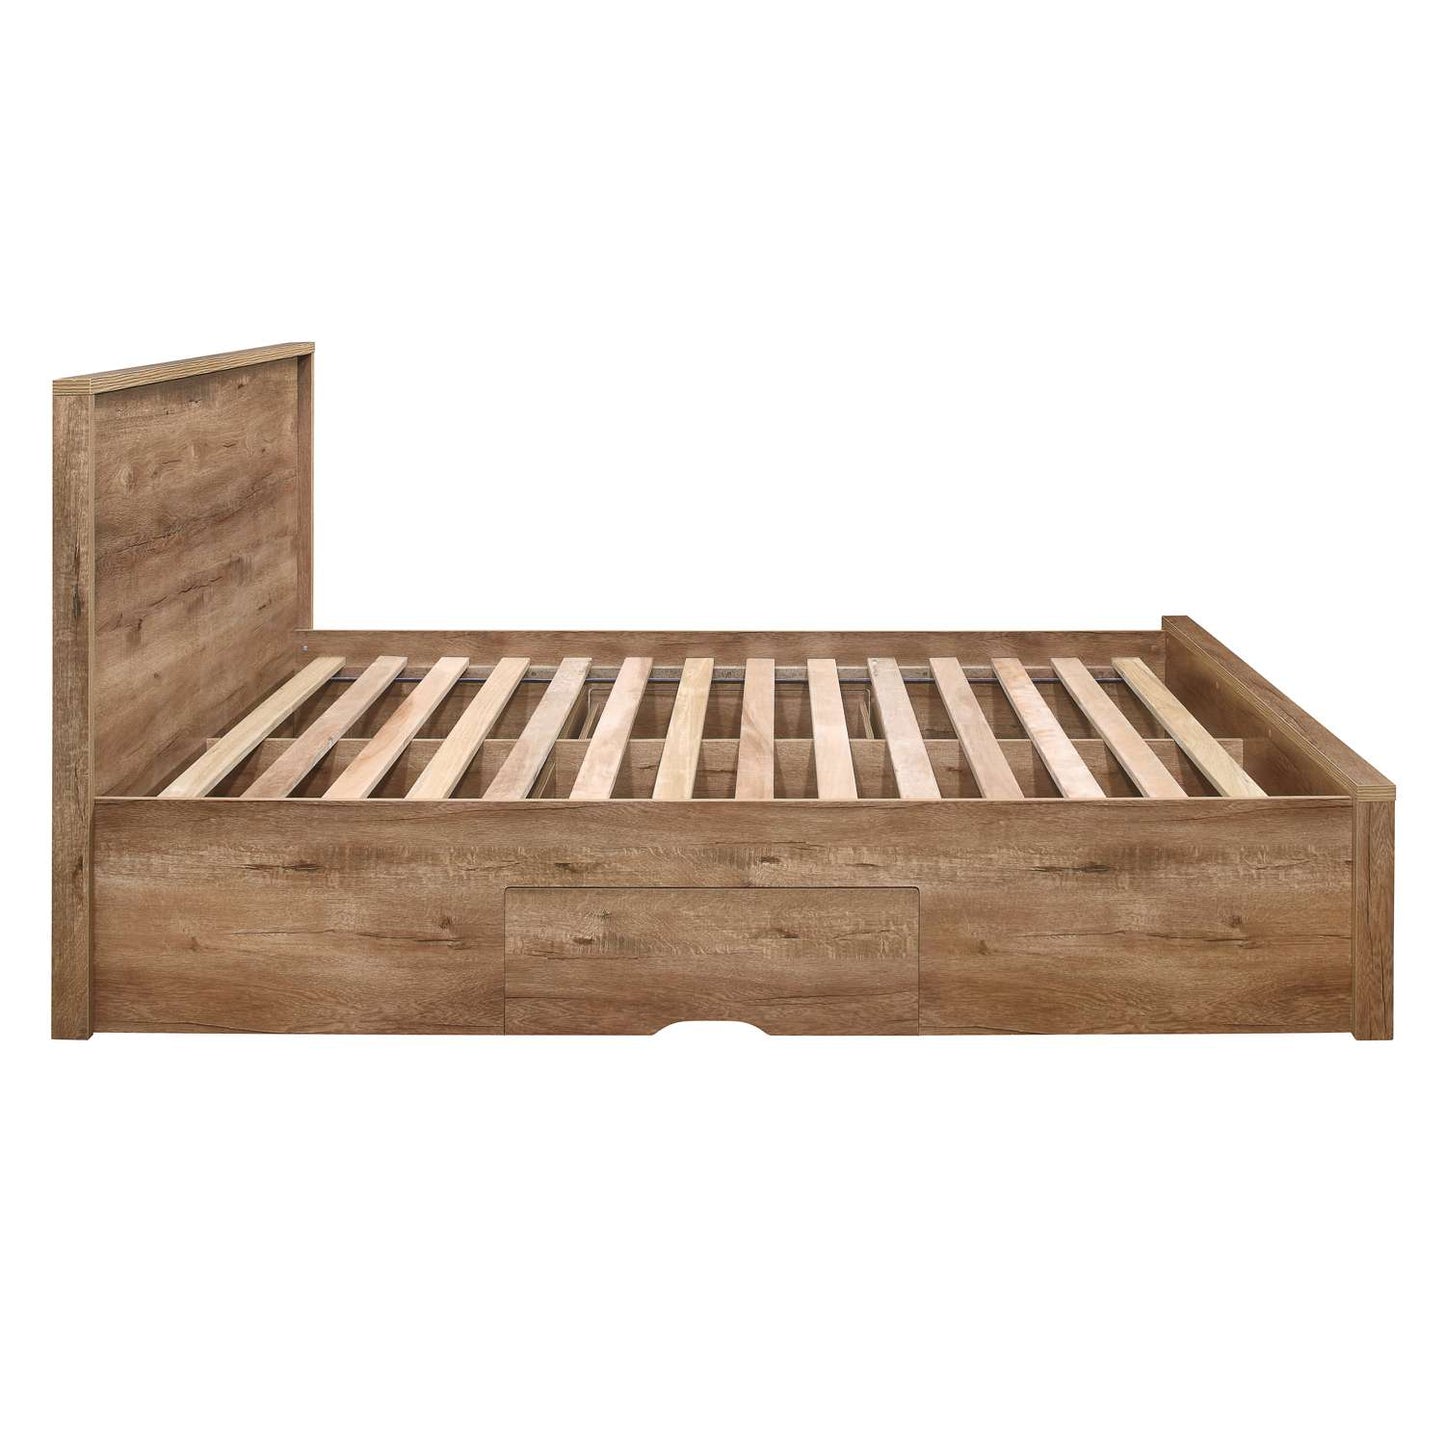 Stockwell 2 Draw Rustic Oak Bed Frame